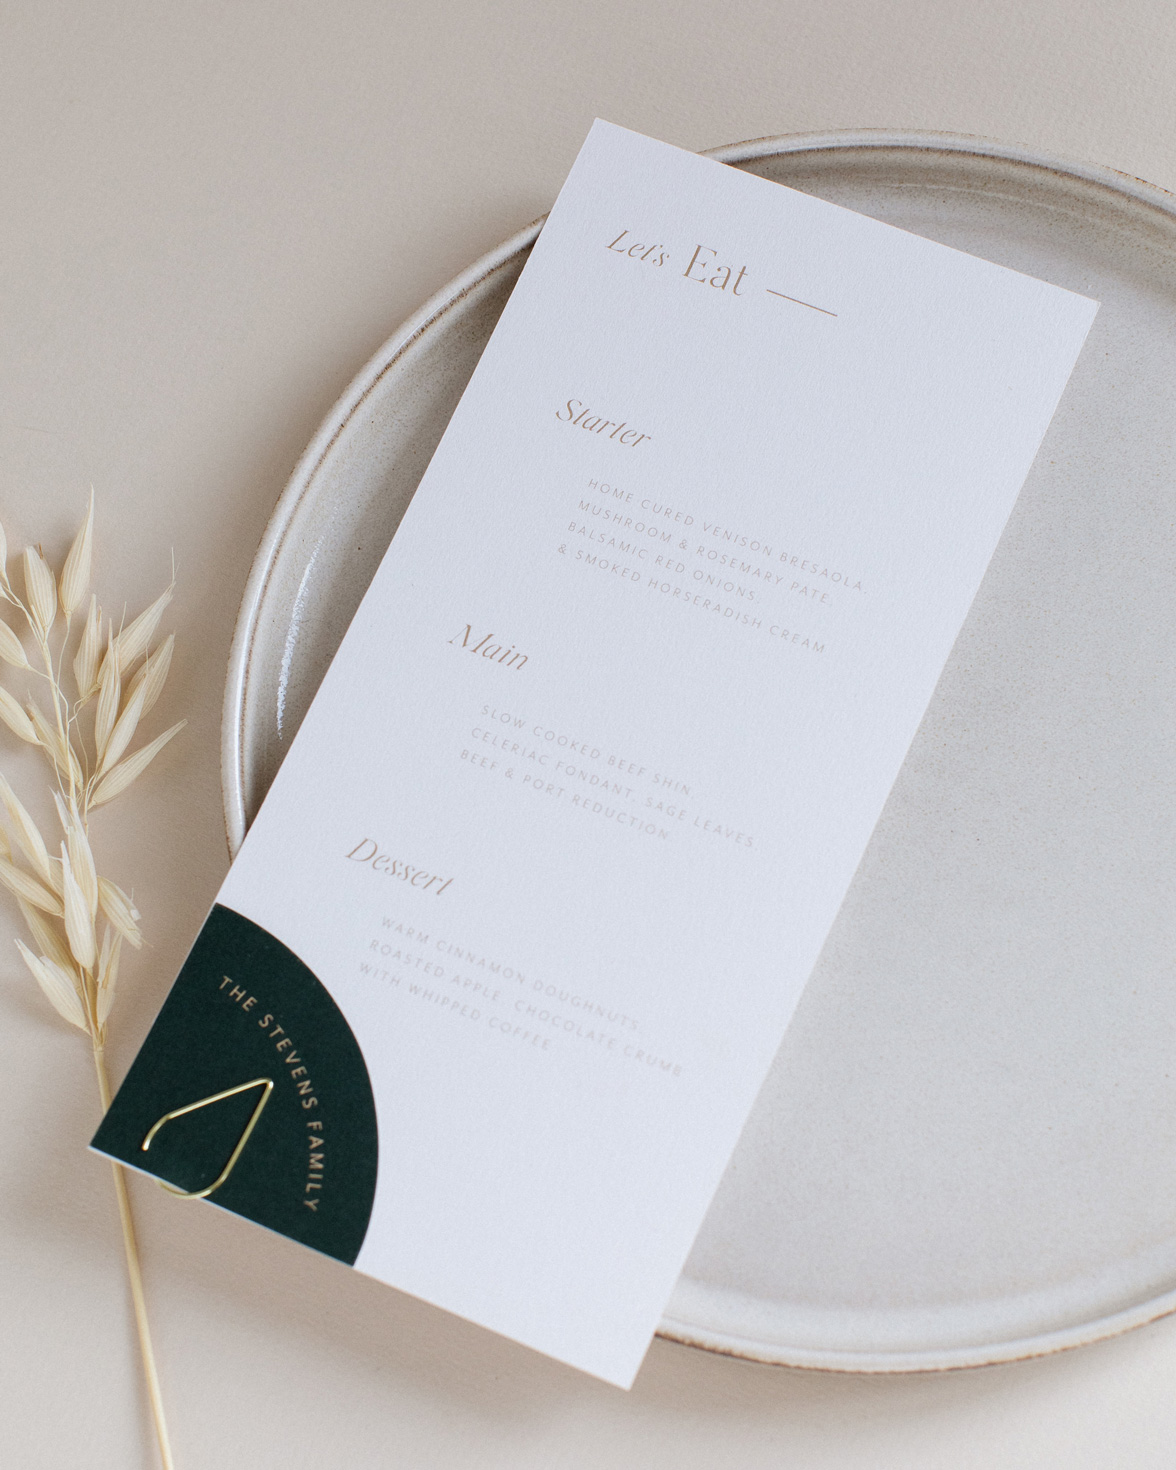 Refined gold wedding menu with digitally printed gold. Quarter circle shape guest name tag attached with a clip.